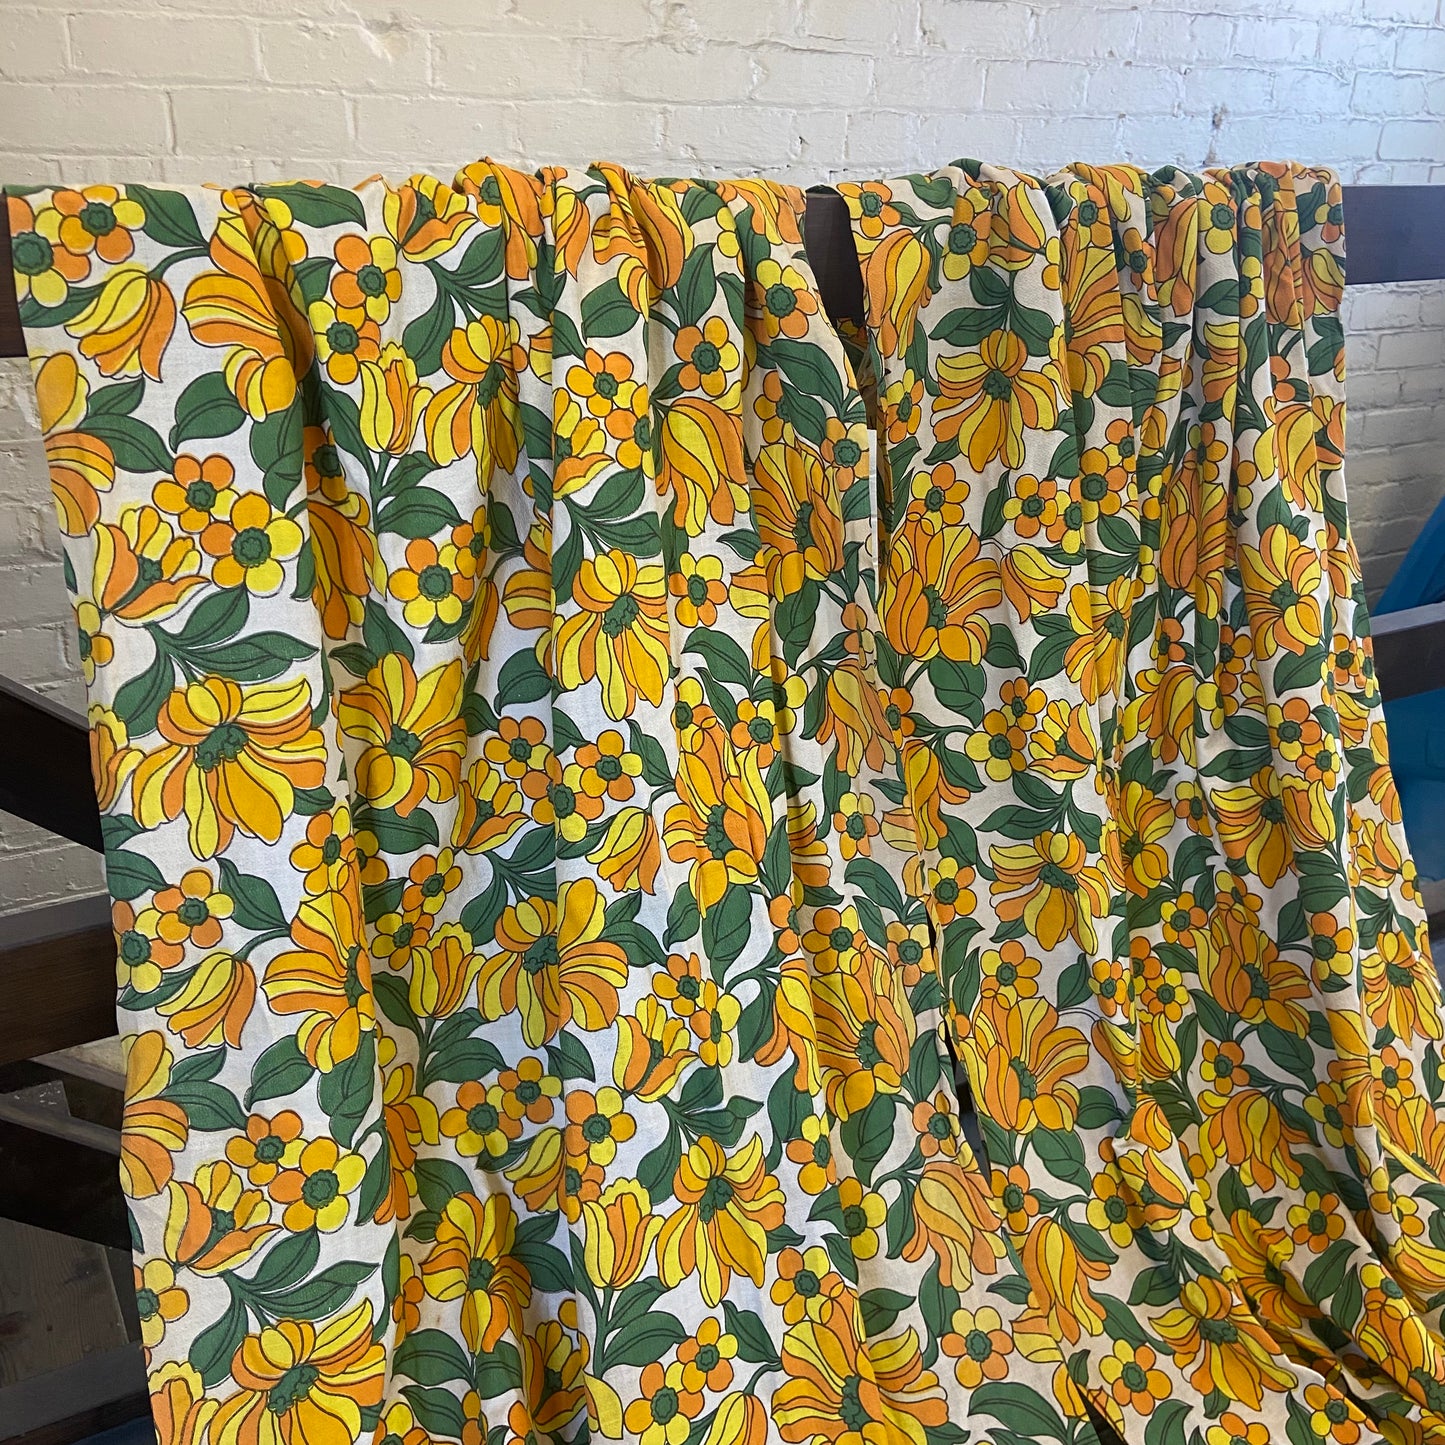 Pair of Long 1970s Yellow Flower Power Curtains